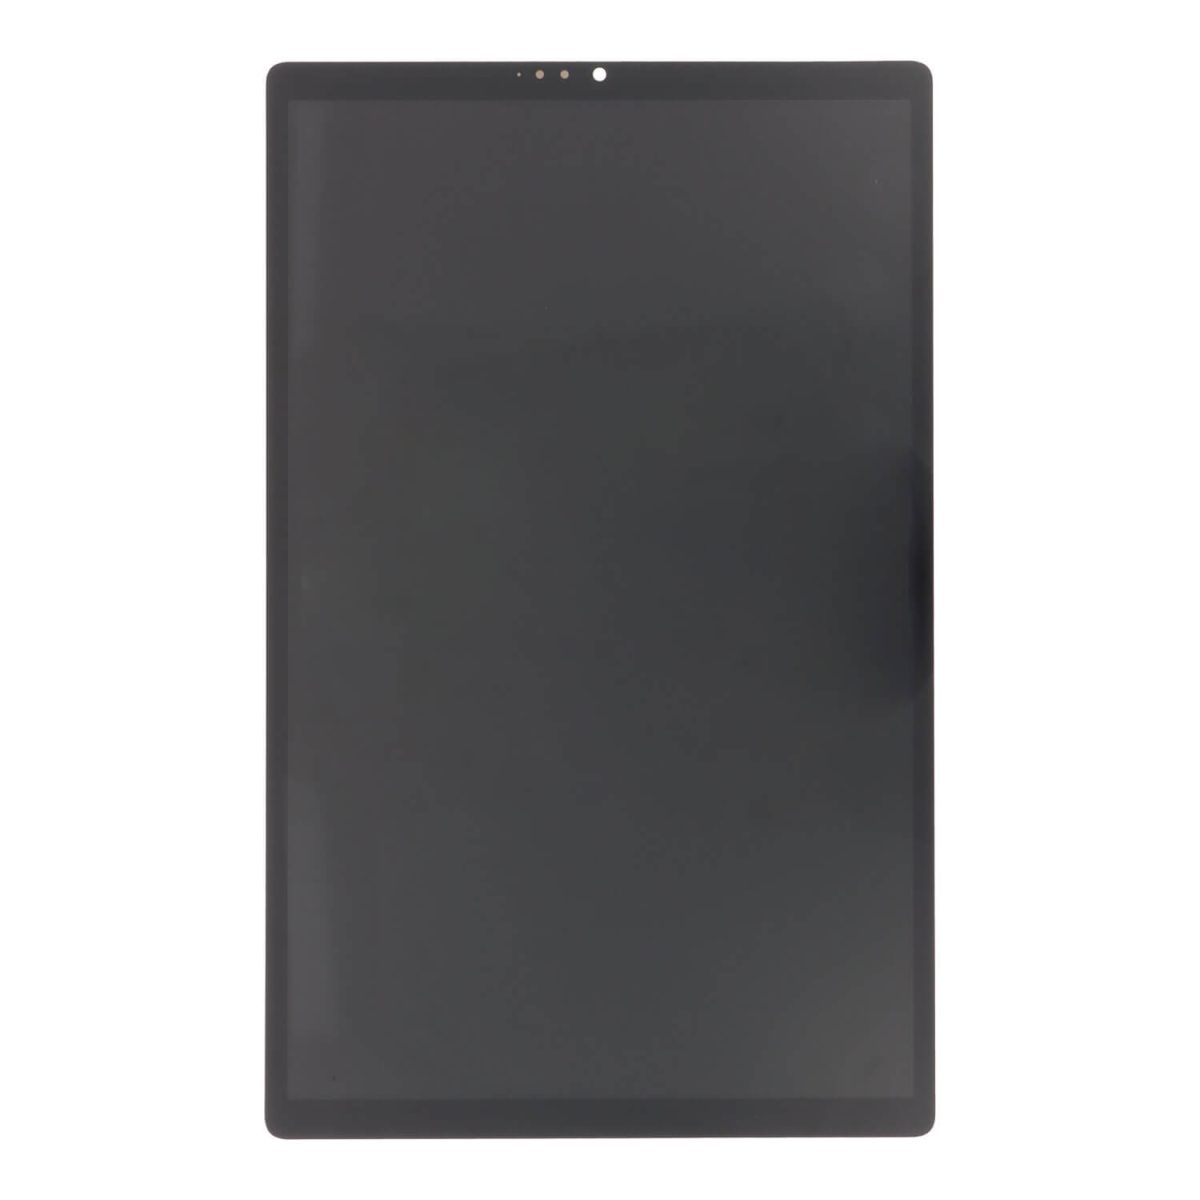 Display + Touch Screen Replacement for Lenovo Tab M10 Plus TB-X606 (High Quality)